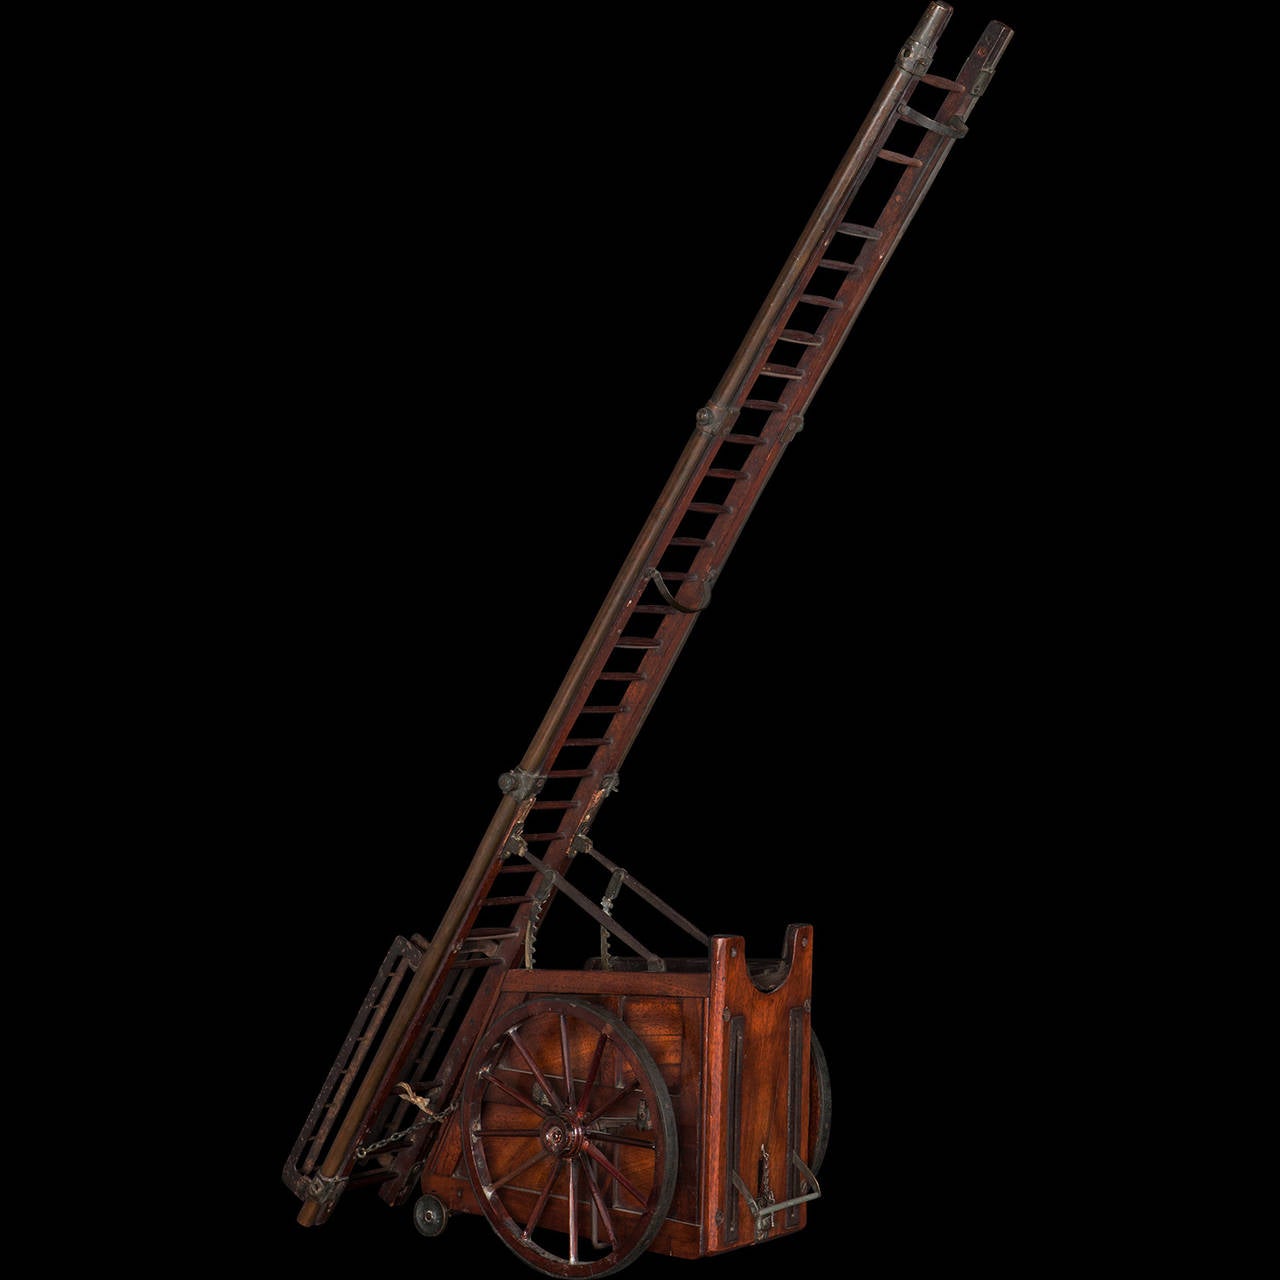 Mahogany, steel, brass, copper, and rope patent model. Lever on the front of the cart that when pulled down and locked in place, raises the ladder on two geared arms with a drawstring.